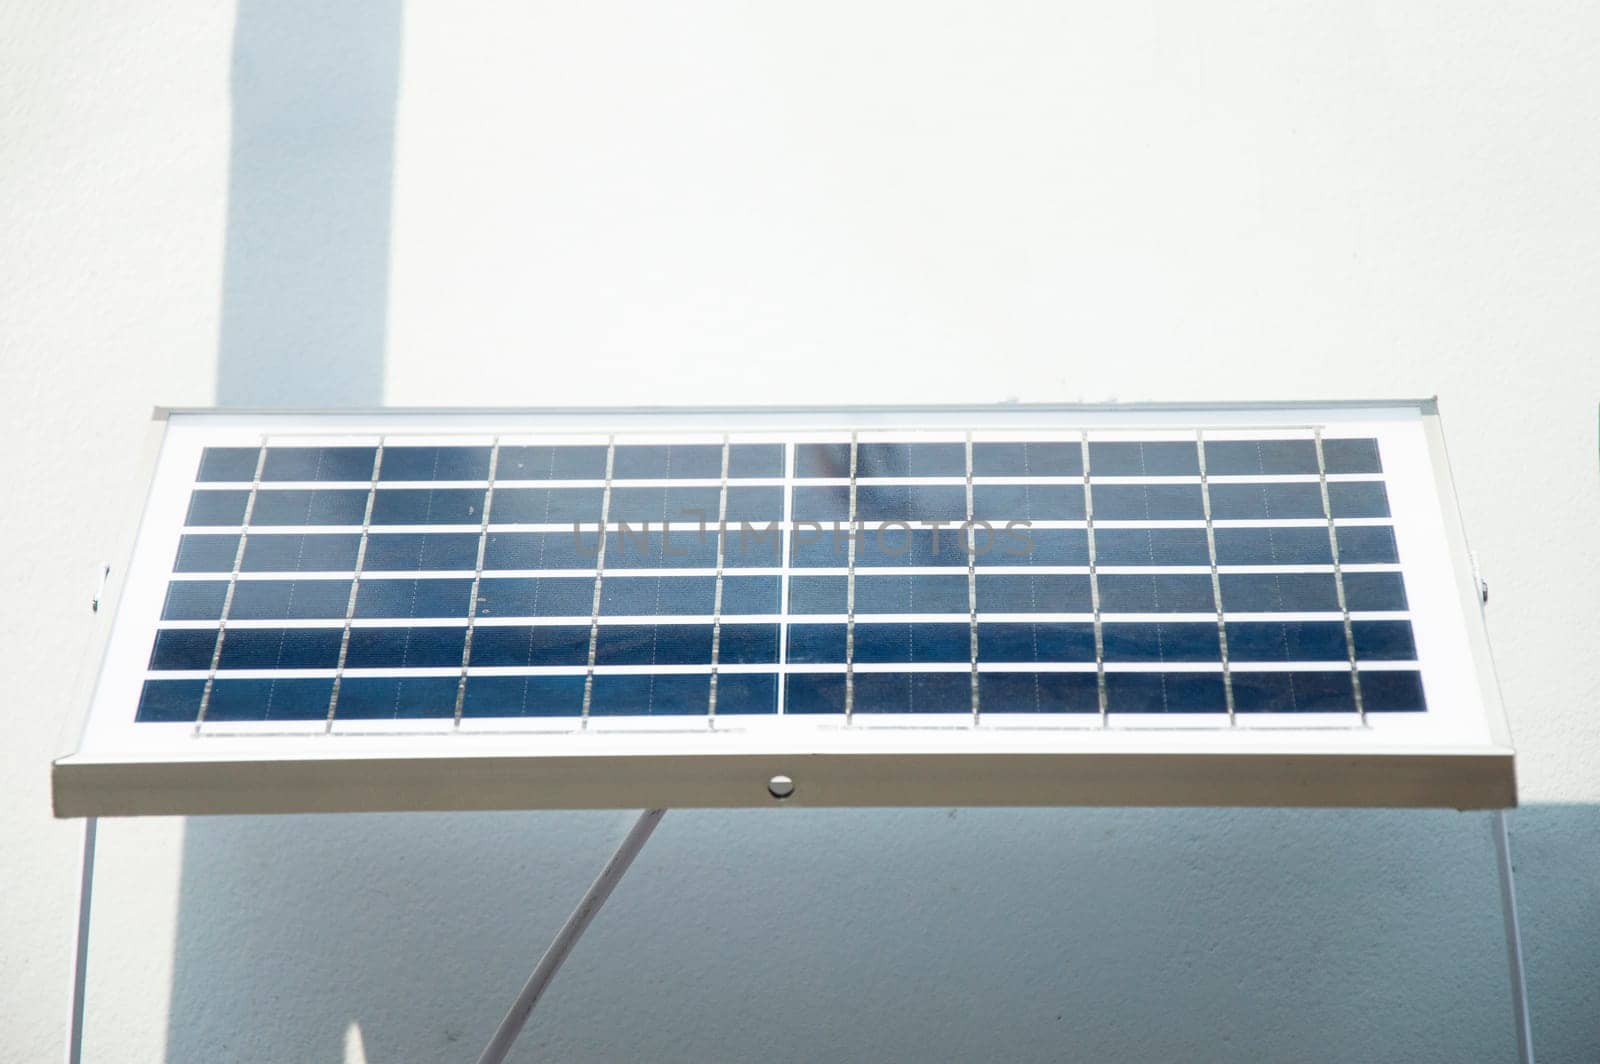 Solar panels, clean energy are becoming increasingly popular.